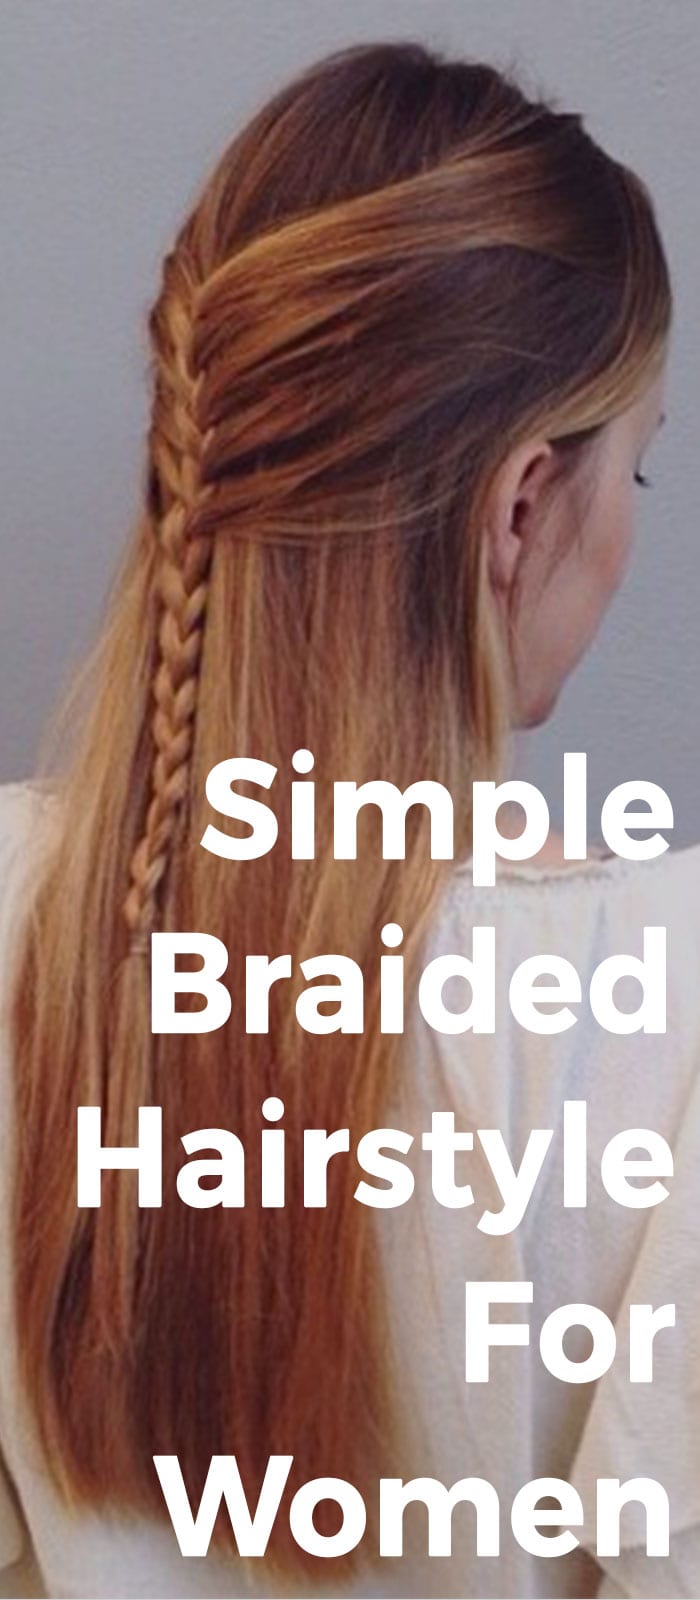 Simple Braided Hairstyle For Women - Theunstitchd Women's Fashion Blog